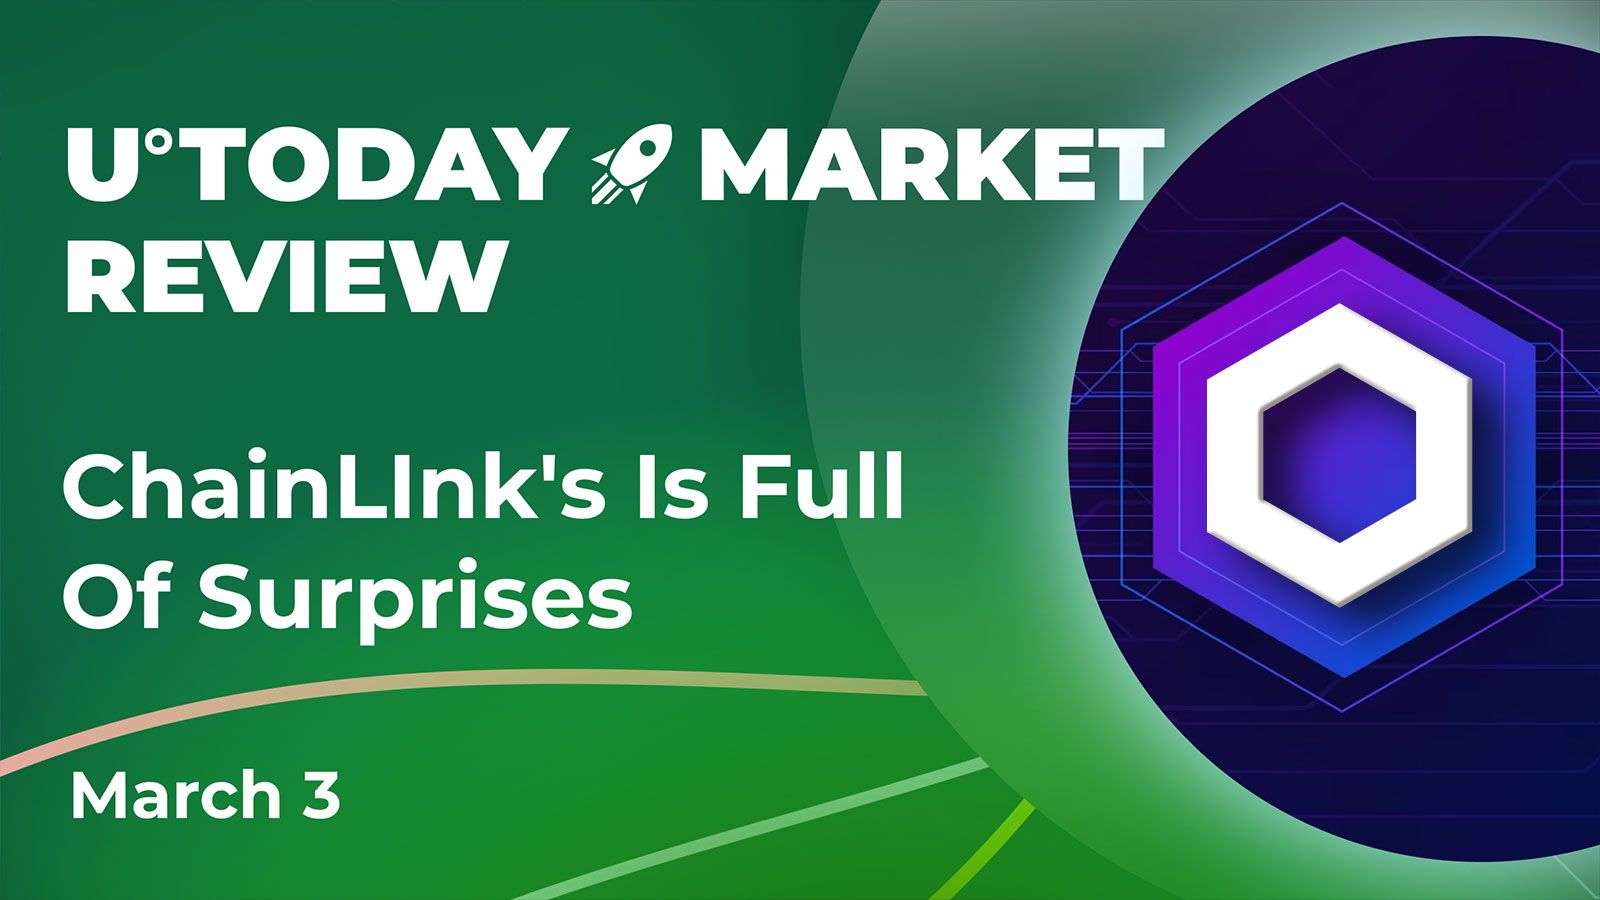 Chainlink's (LINK) Market Performance Shows Unexpected Tendencies